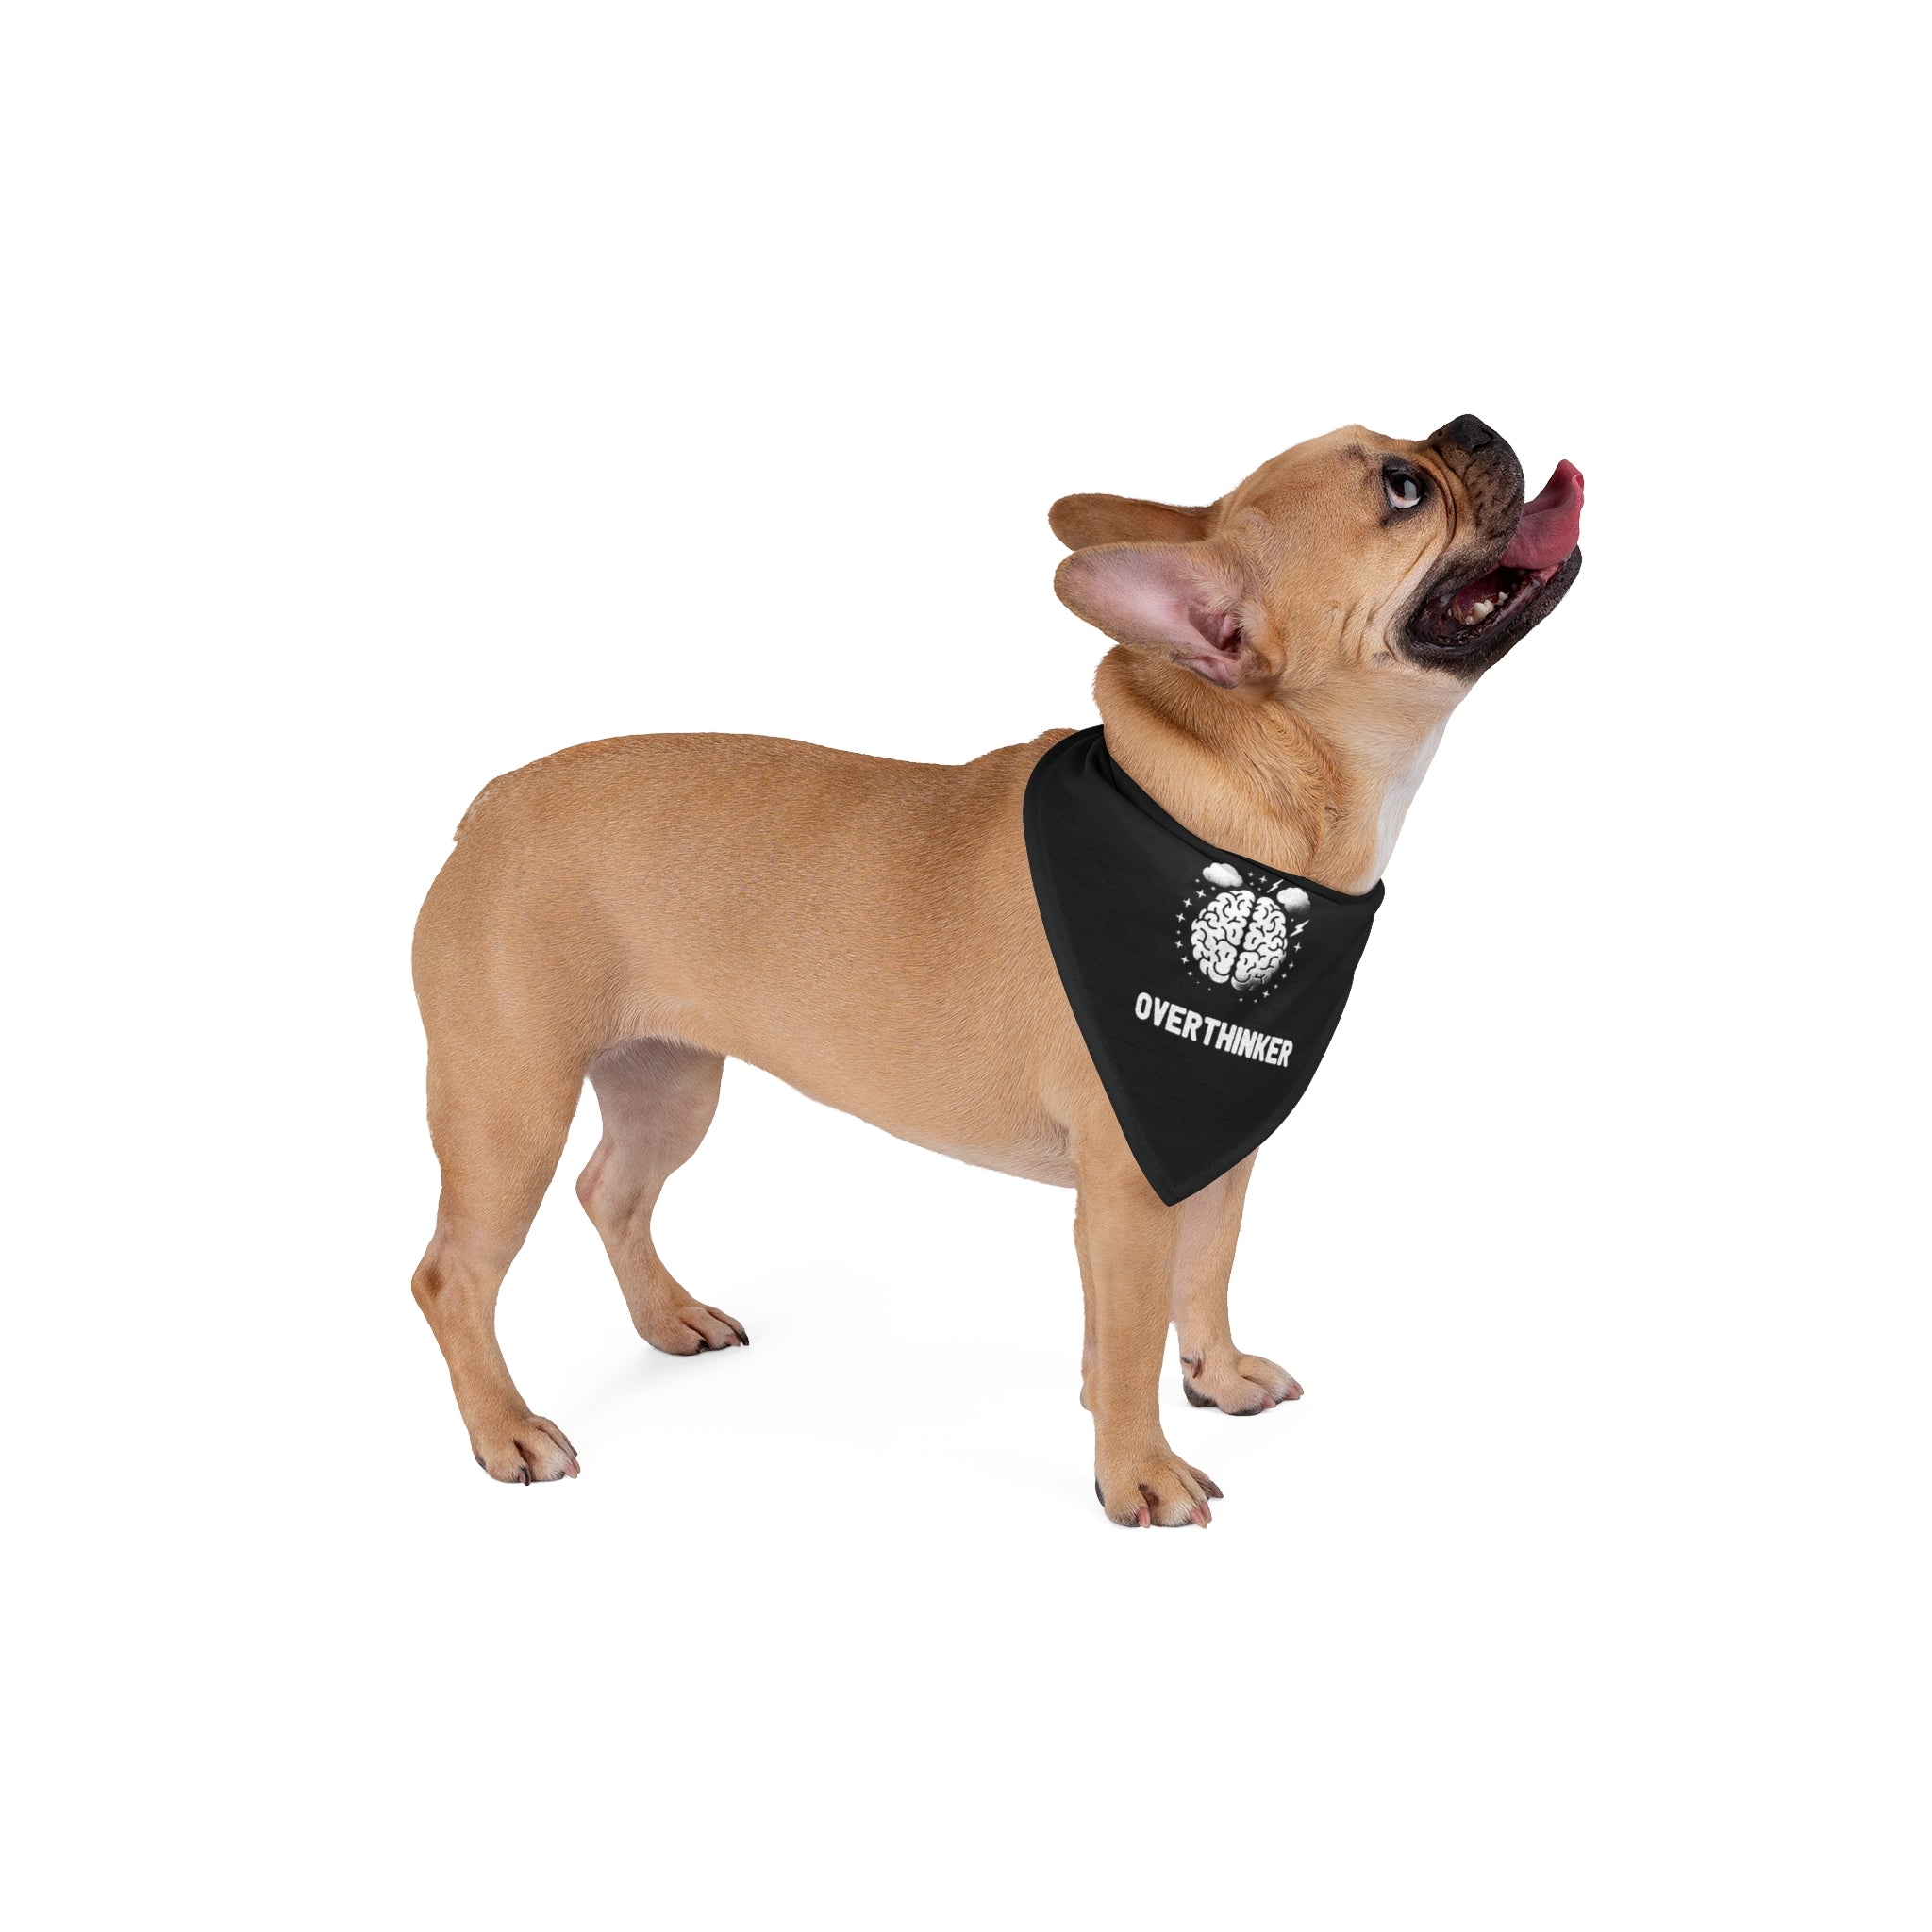 A light brown French Bulldog wearing a black polyester Professional Overthinker - Pet Bandana with the text "Professional Overthinker" and an image of a brain looks upwards with its mouth open and tongue out.